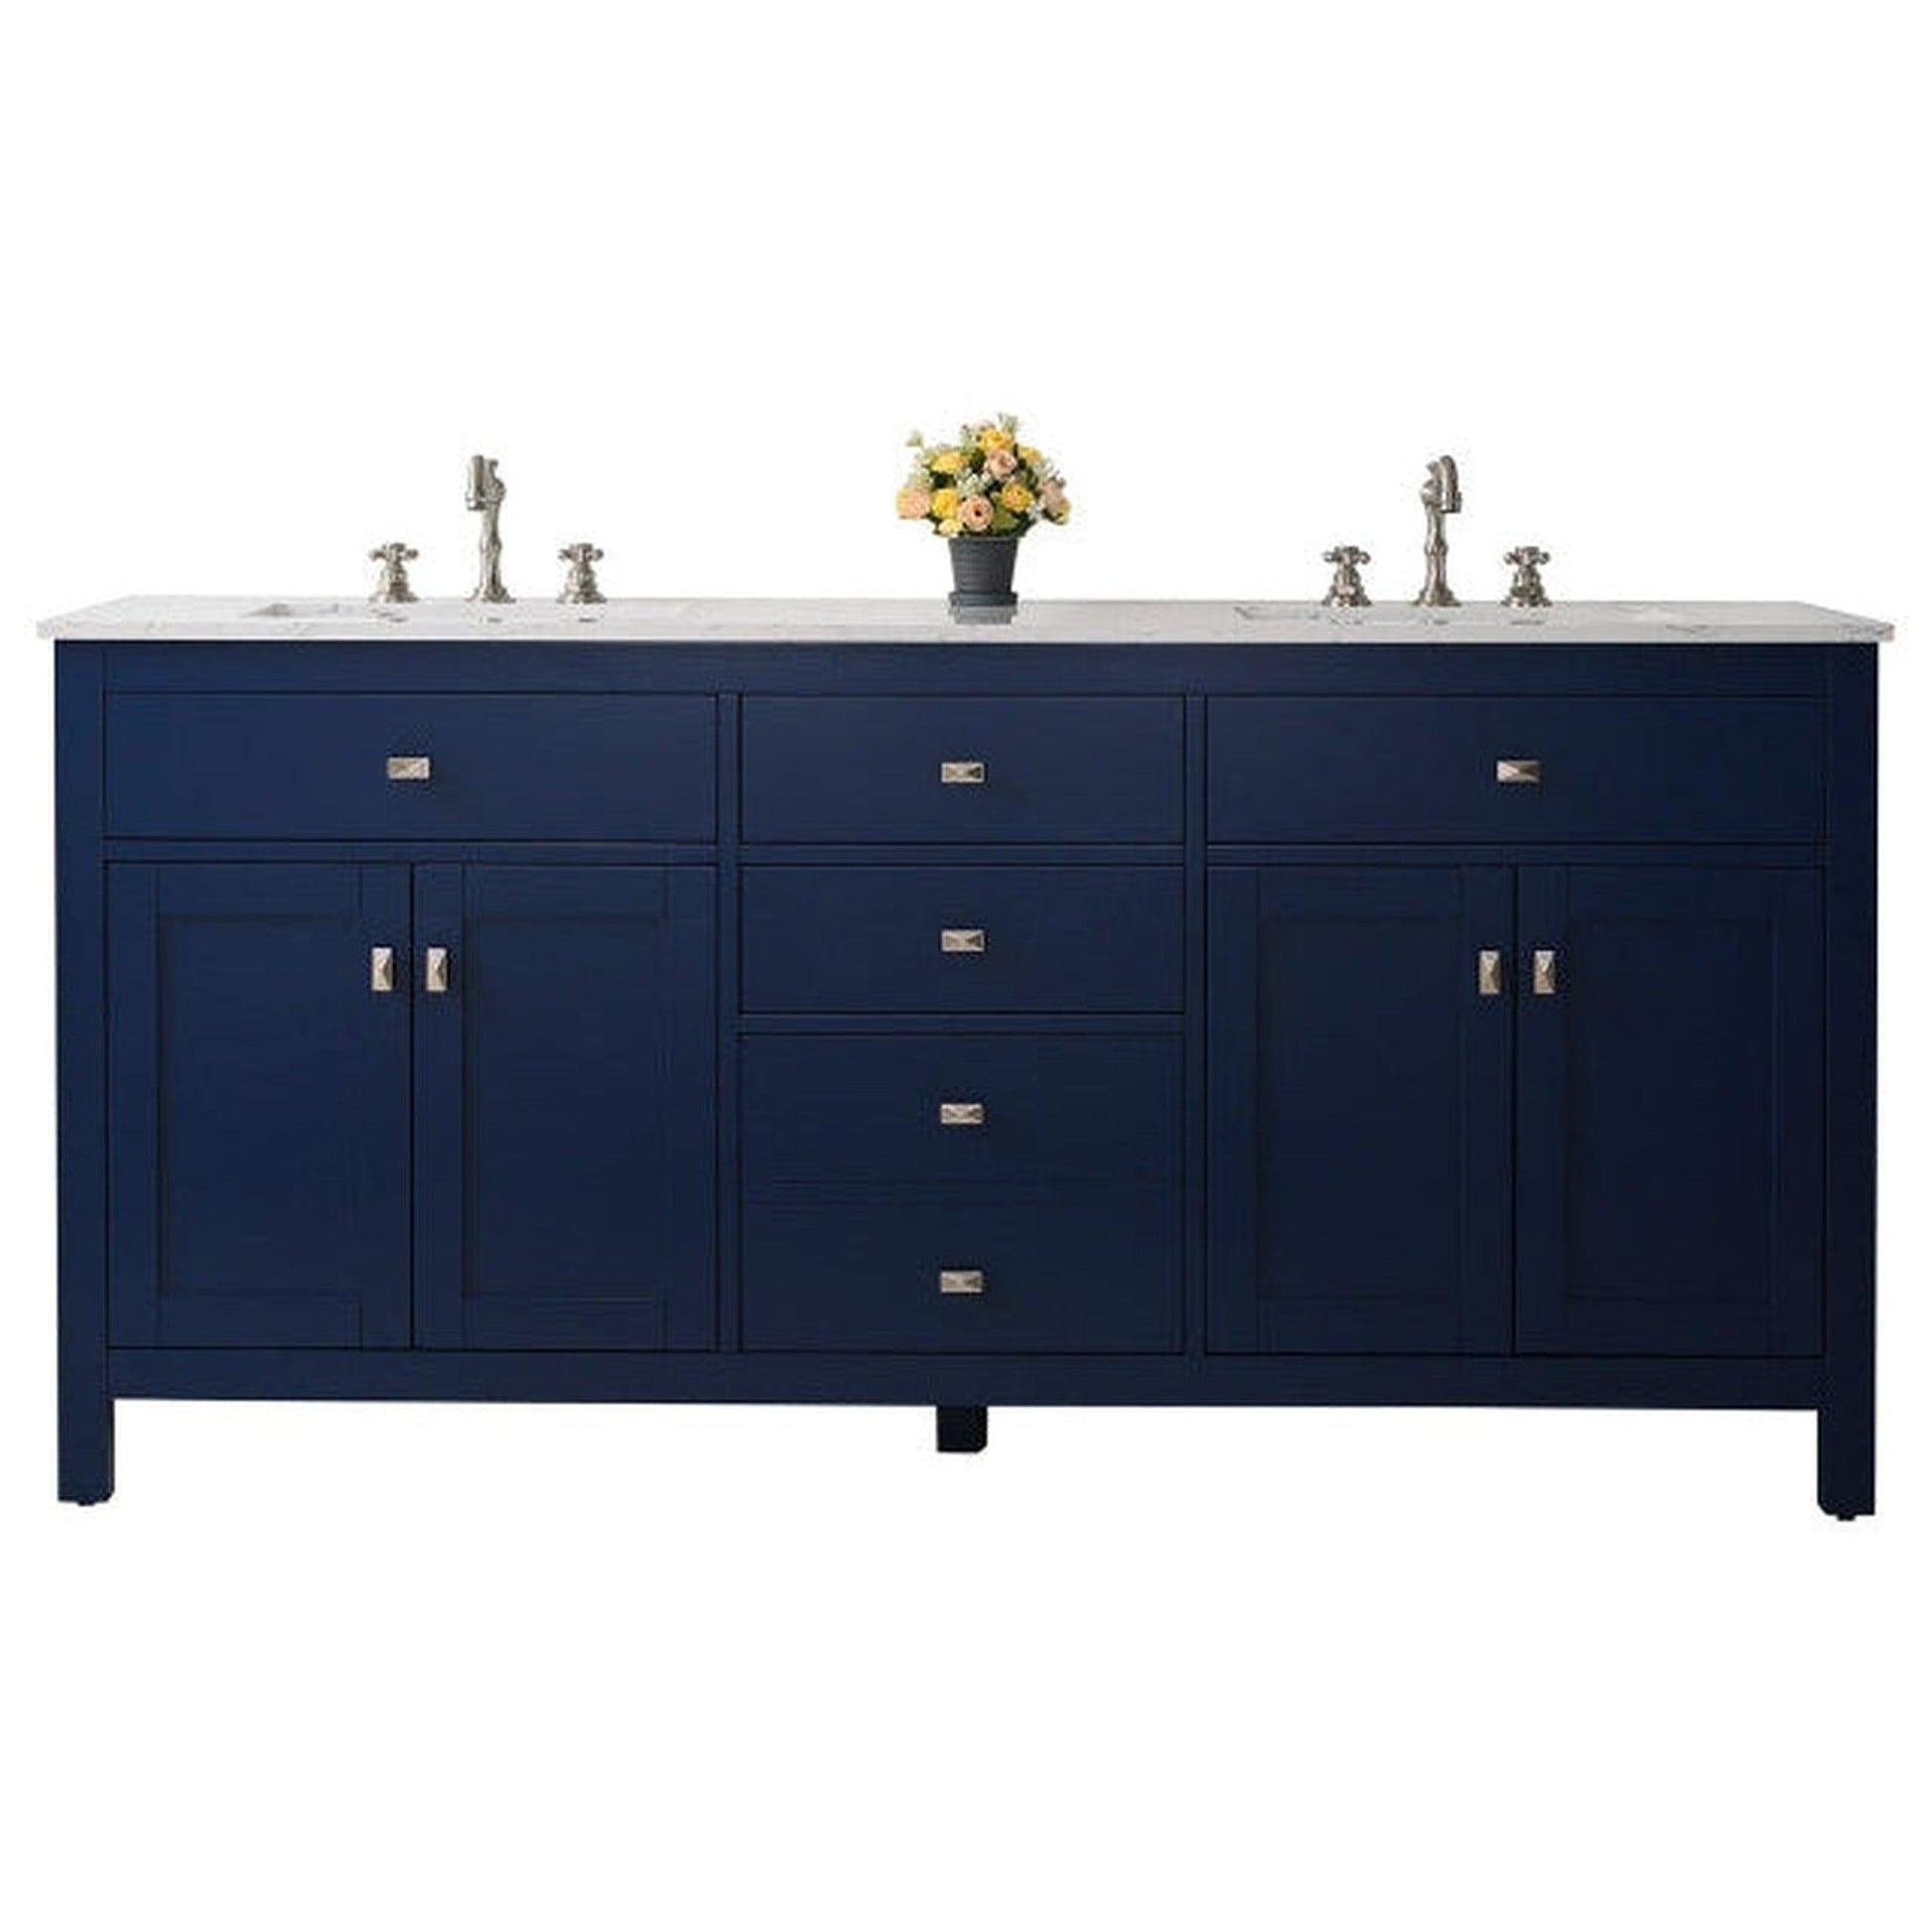 Eviva Totti Artemis 72" x 34" Blue Freestanding Bathroom Vanity With Carrara Style Man-made Stone Countertop and Double Undermount Sink